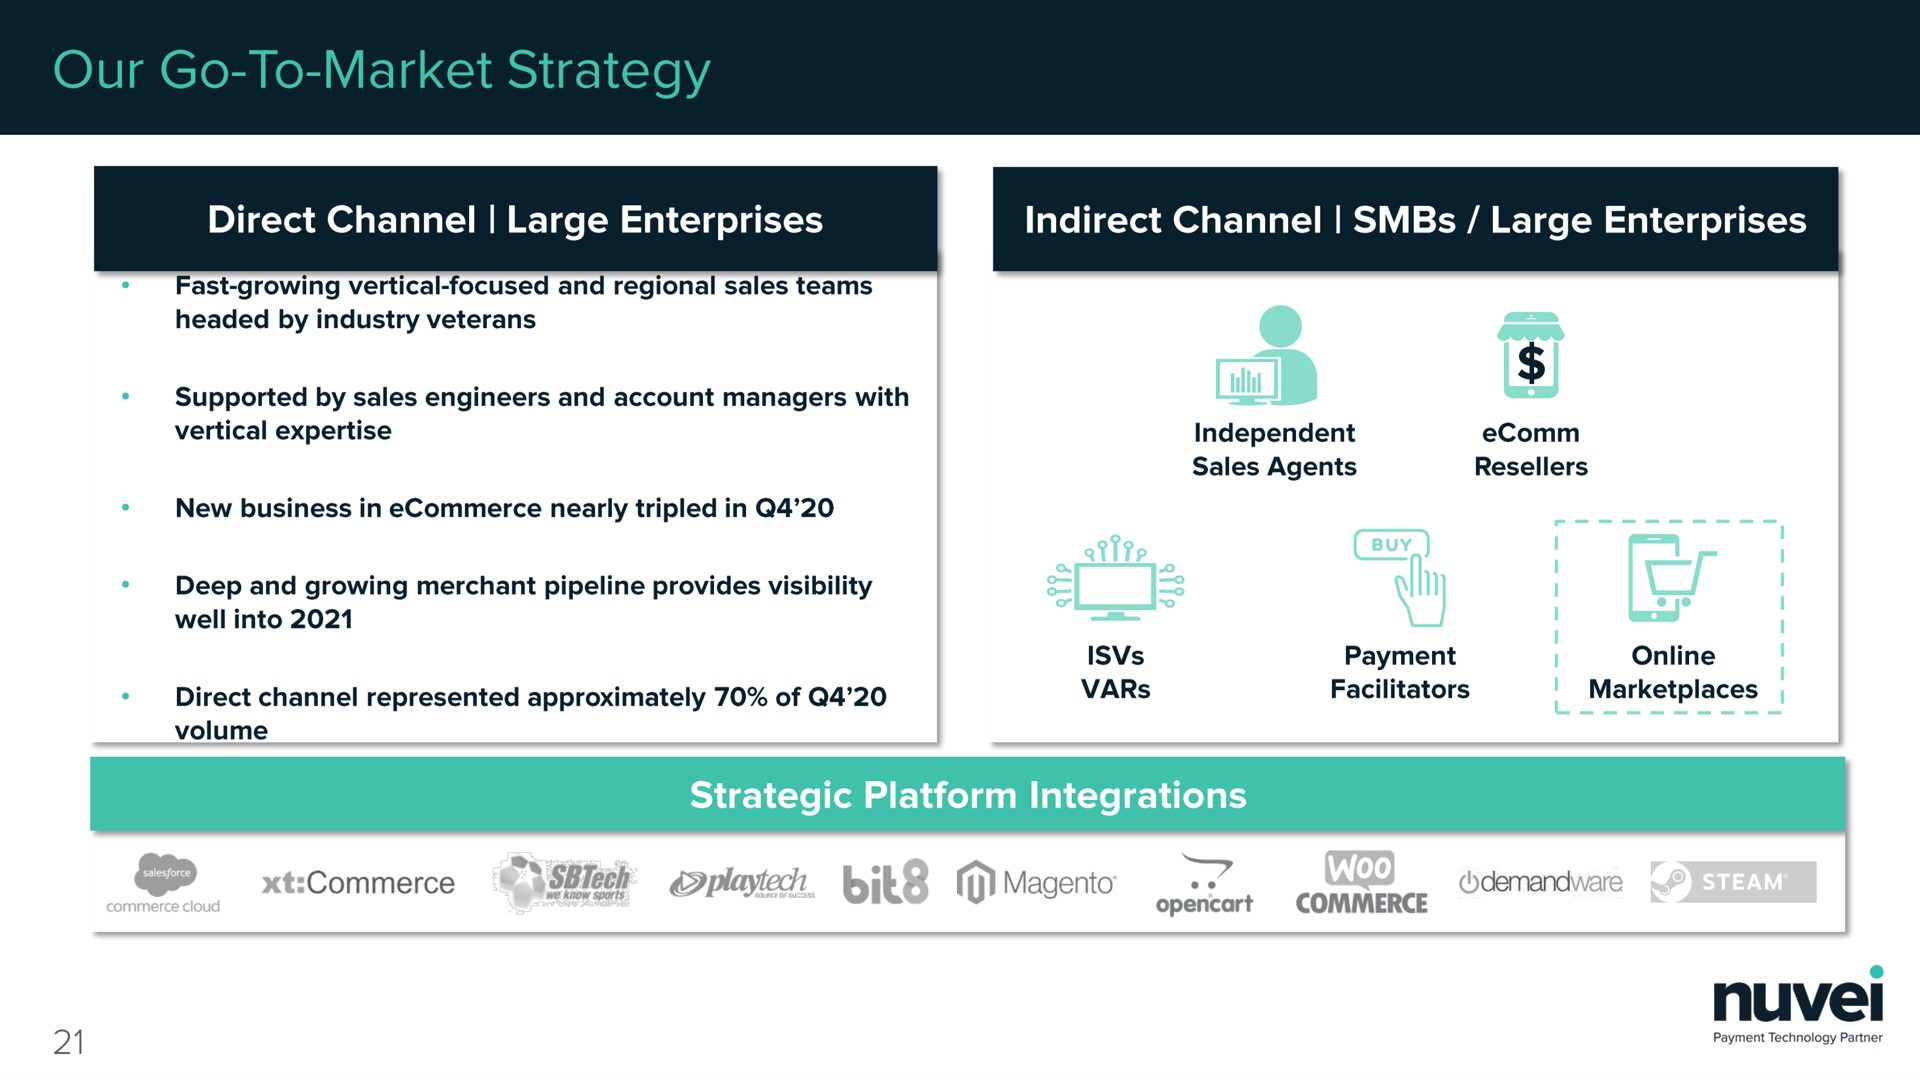 our go to market strategy direct channel large enterprises indirect channel large enterprises direct channel represented approximately of facilitators | Nuvei